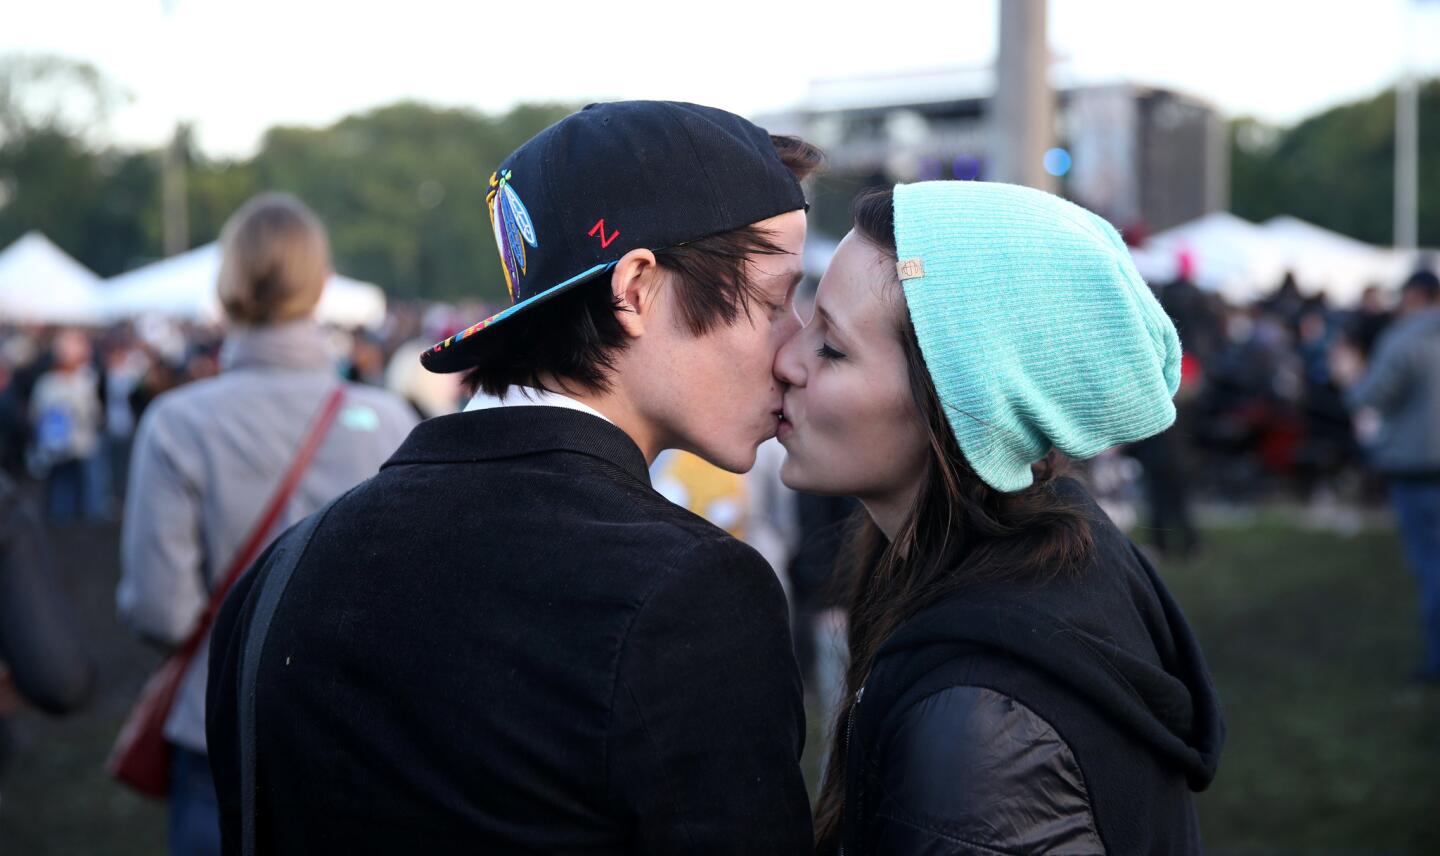 Gavin Christopherson and Kacy Appelgren share a kiss at Riot Fest in Chicago's Humboldt Park on Saturday, September 13, 2014.